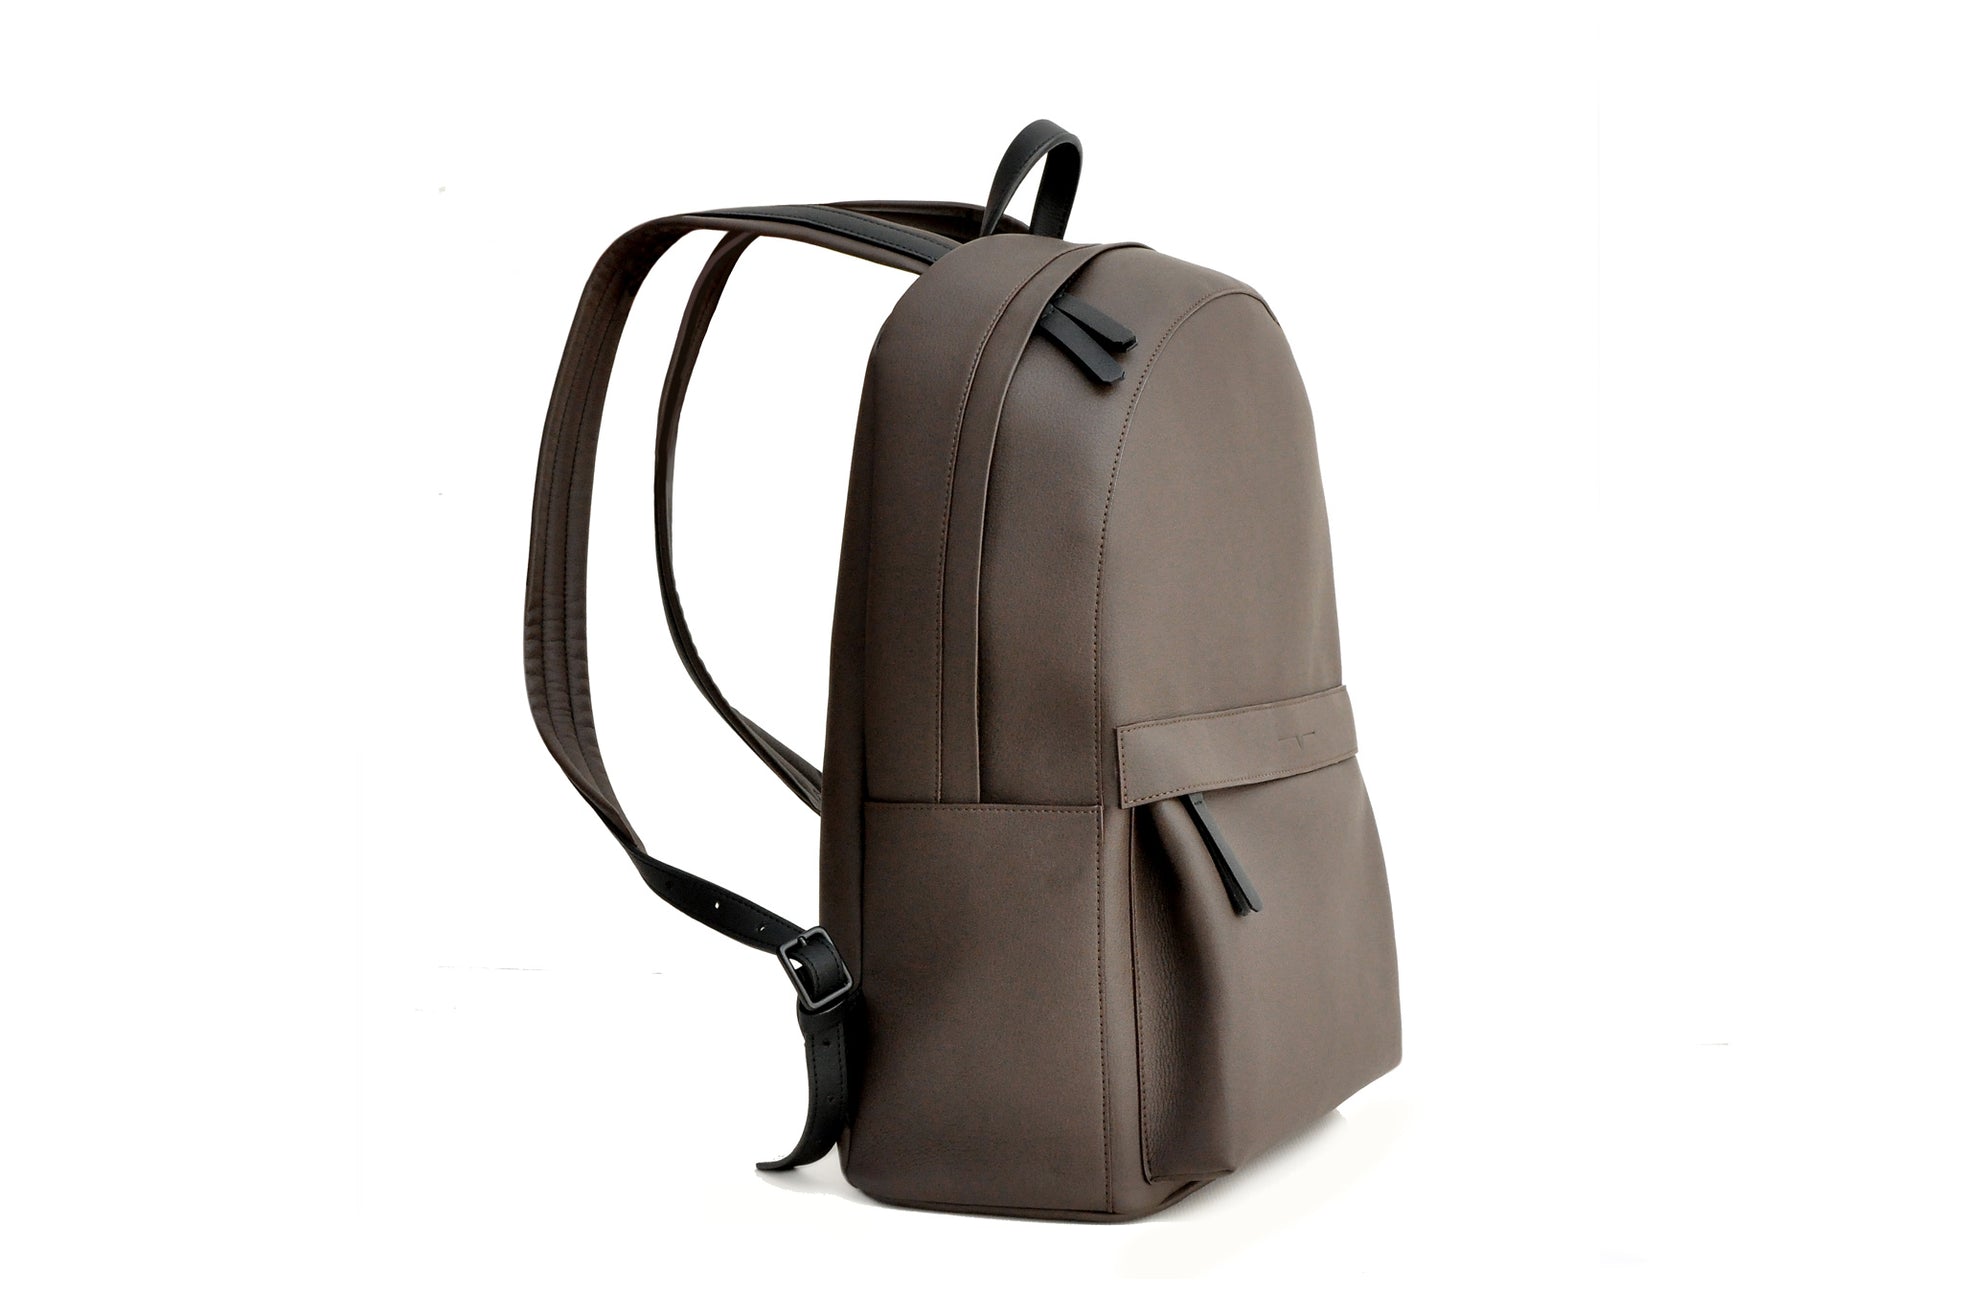 The Classic Backpack in Technik in Taupe and Black image 4